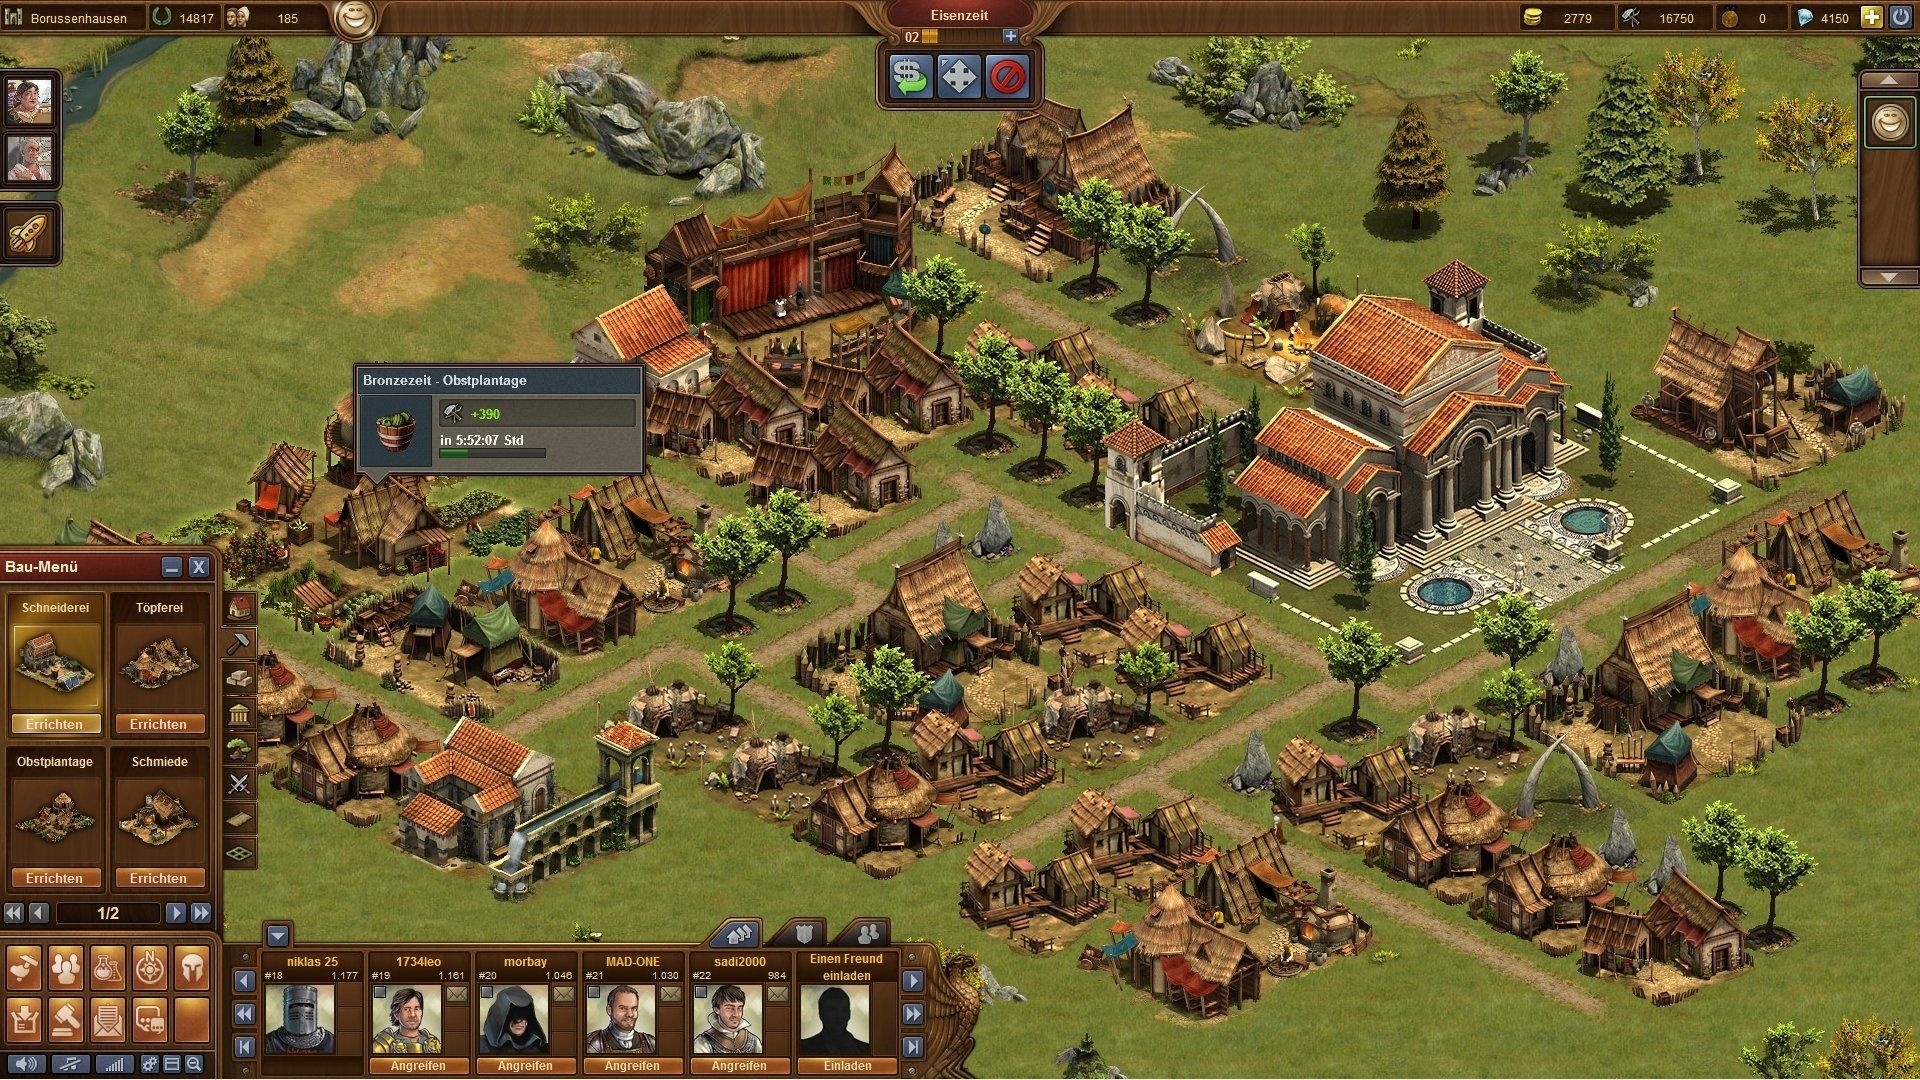 p2p pc game like forge of empires